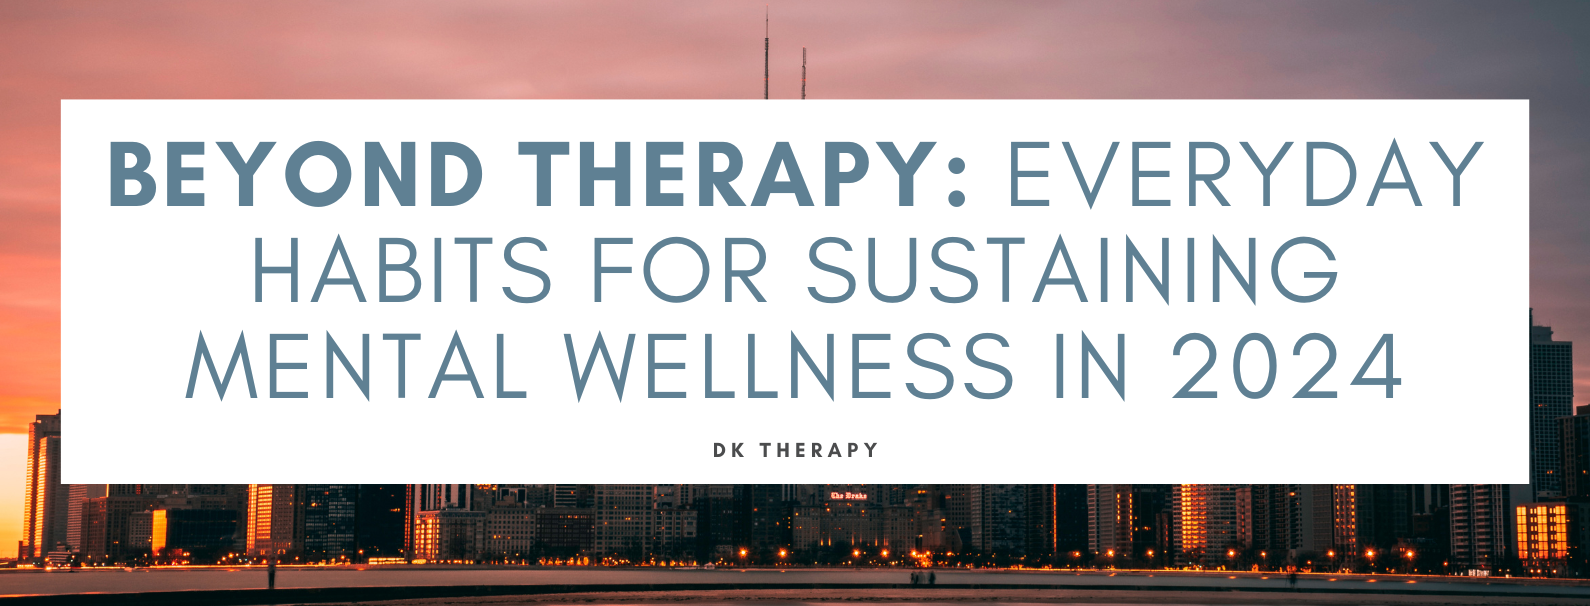 Beyond Therapy: Everyday Habits for Sustaining Mental Wellness in 2024